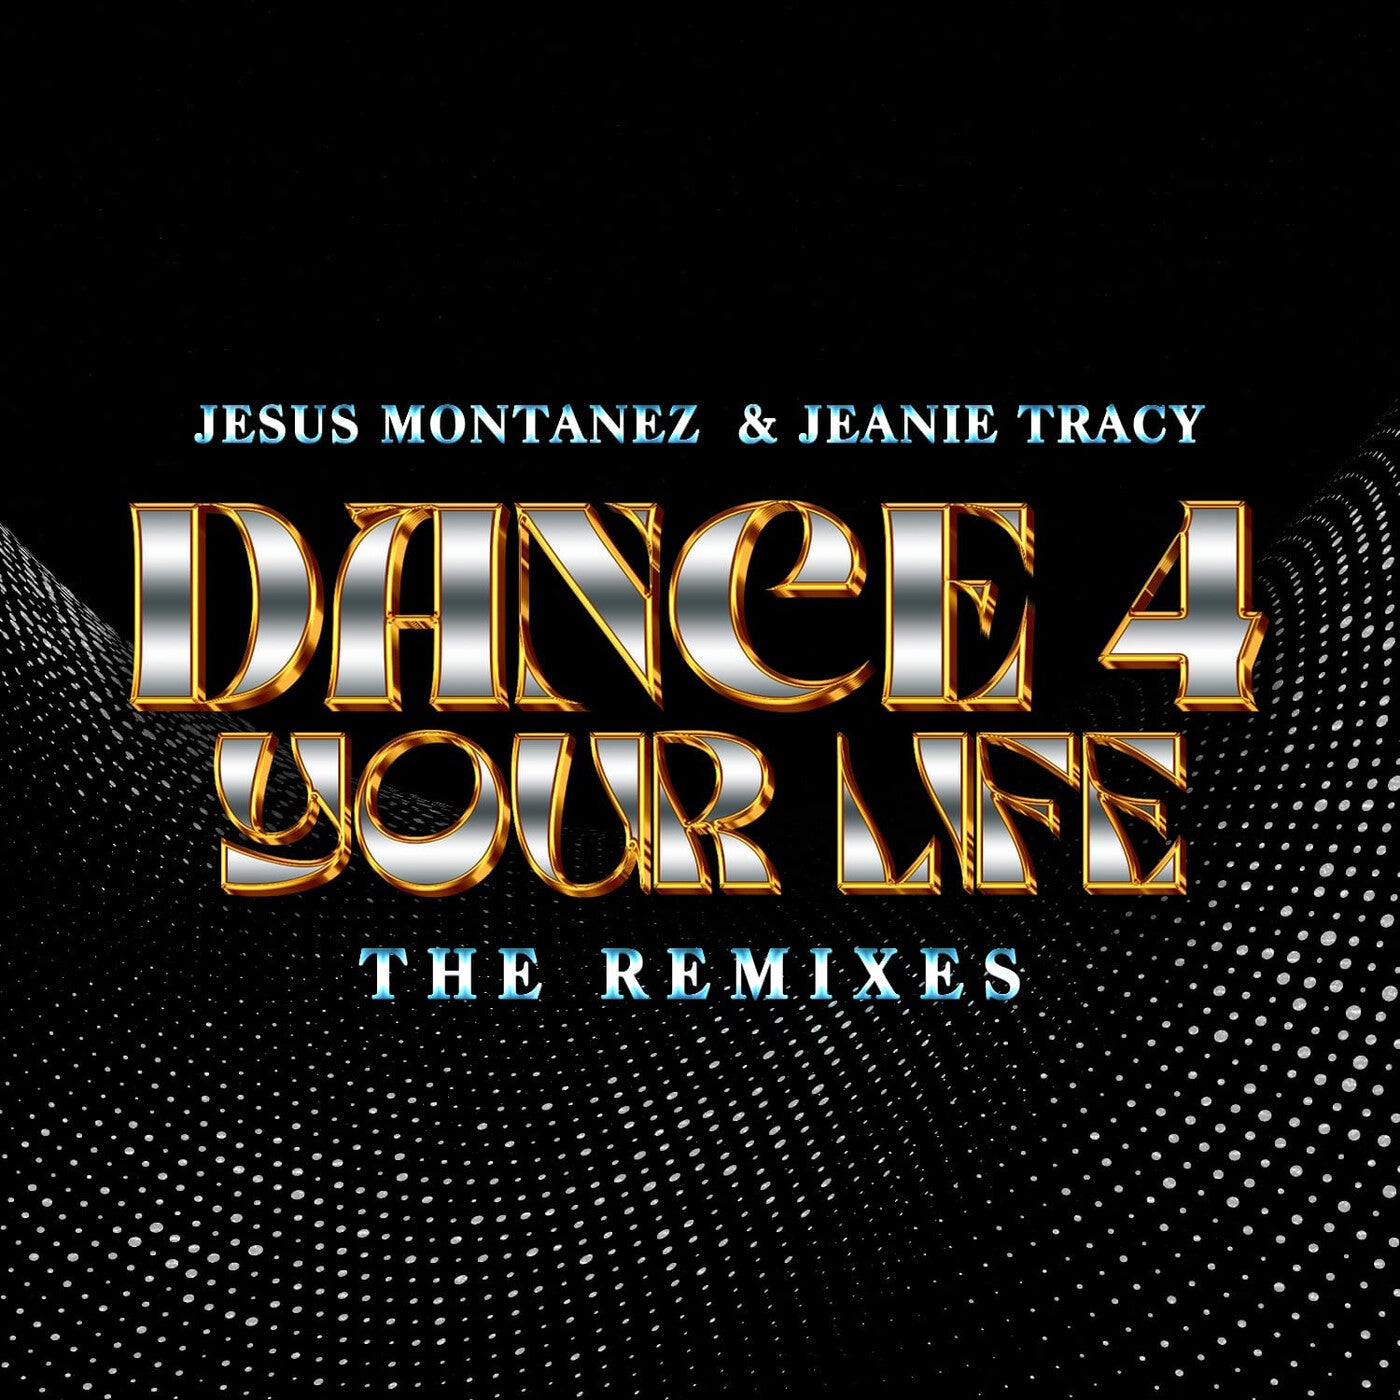 DANCE 4 YOUR LIFE (THE REMIXES)